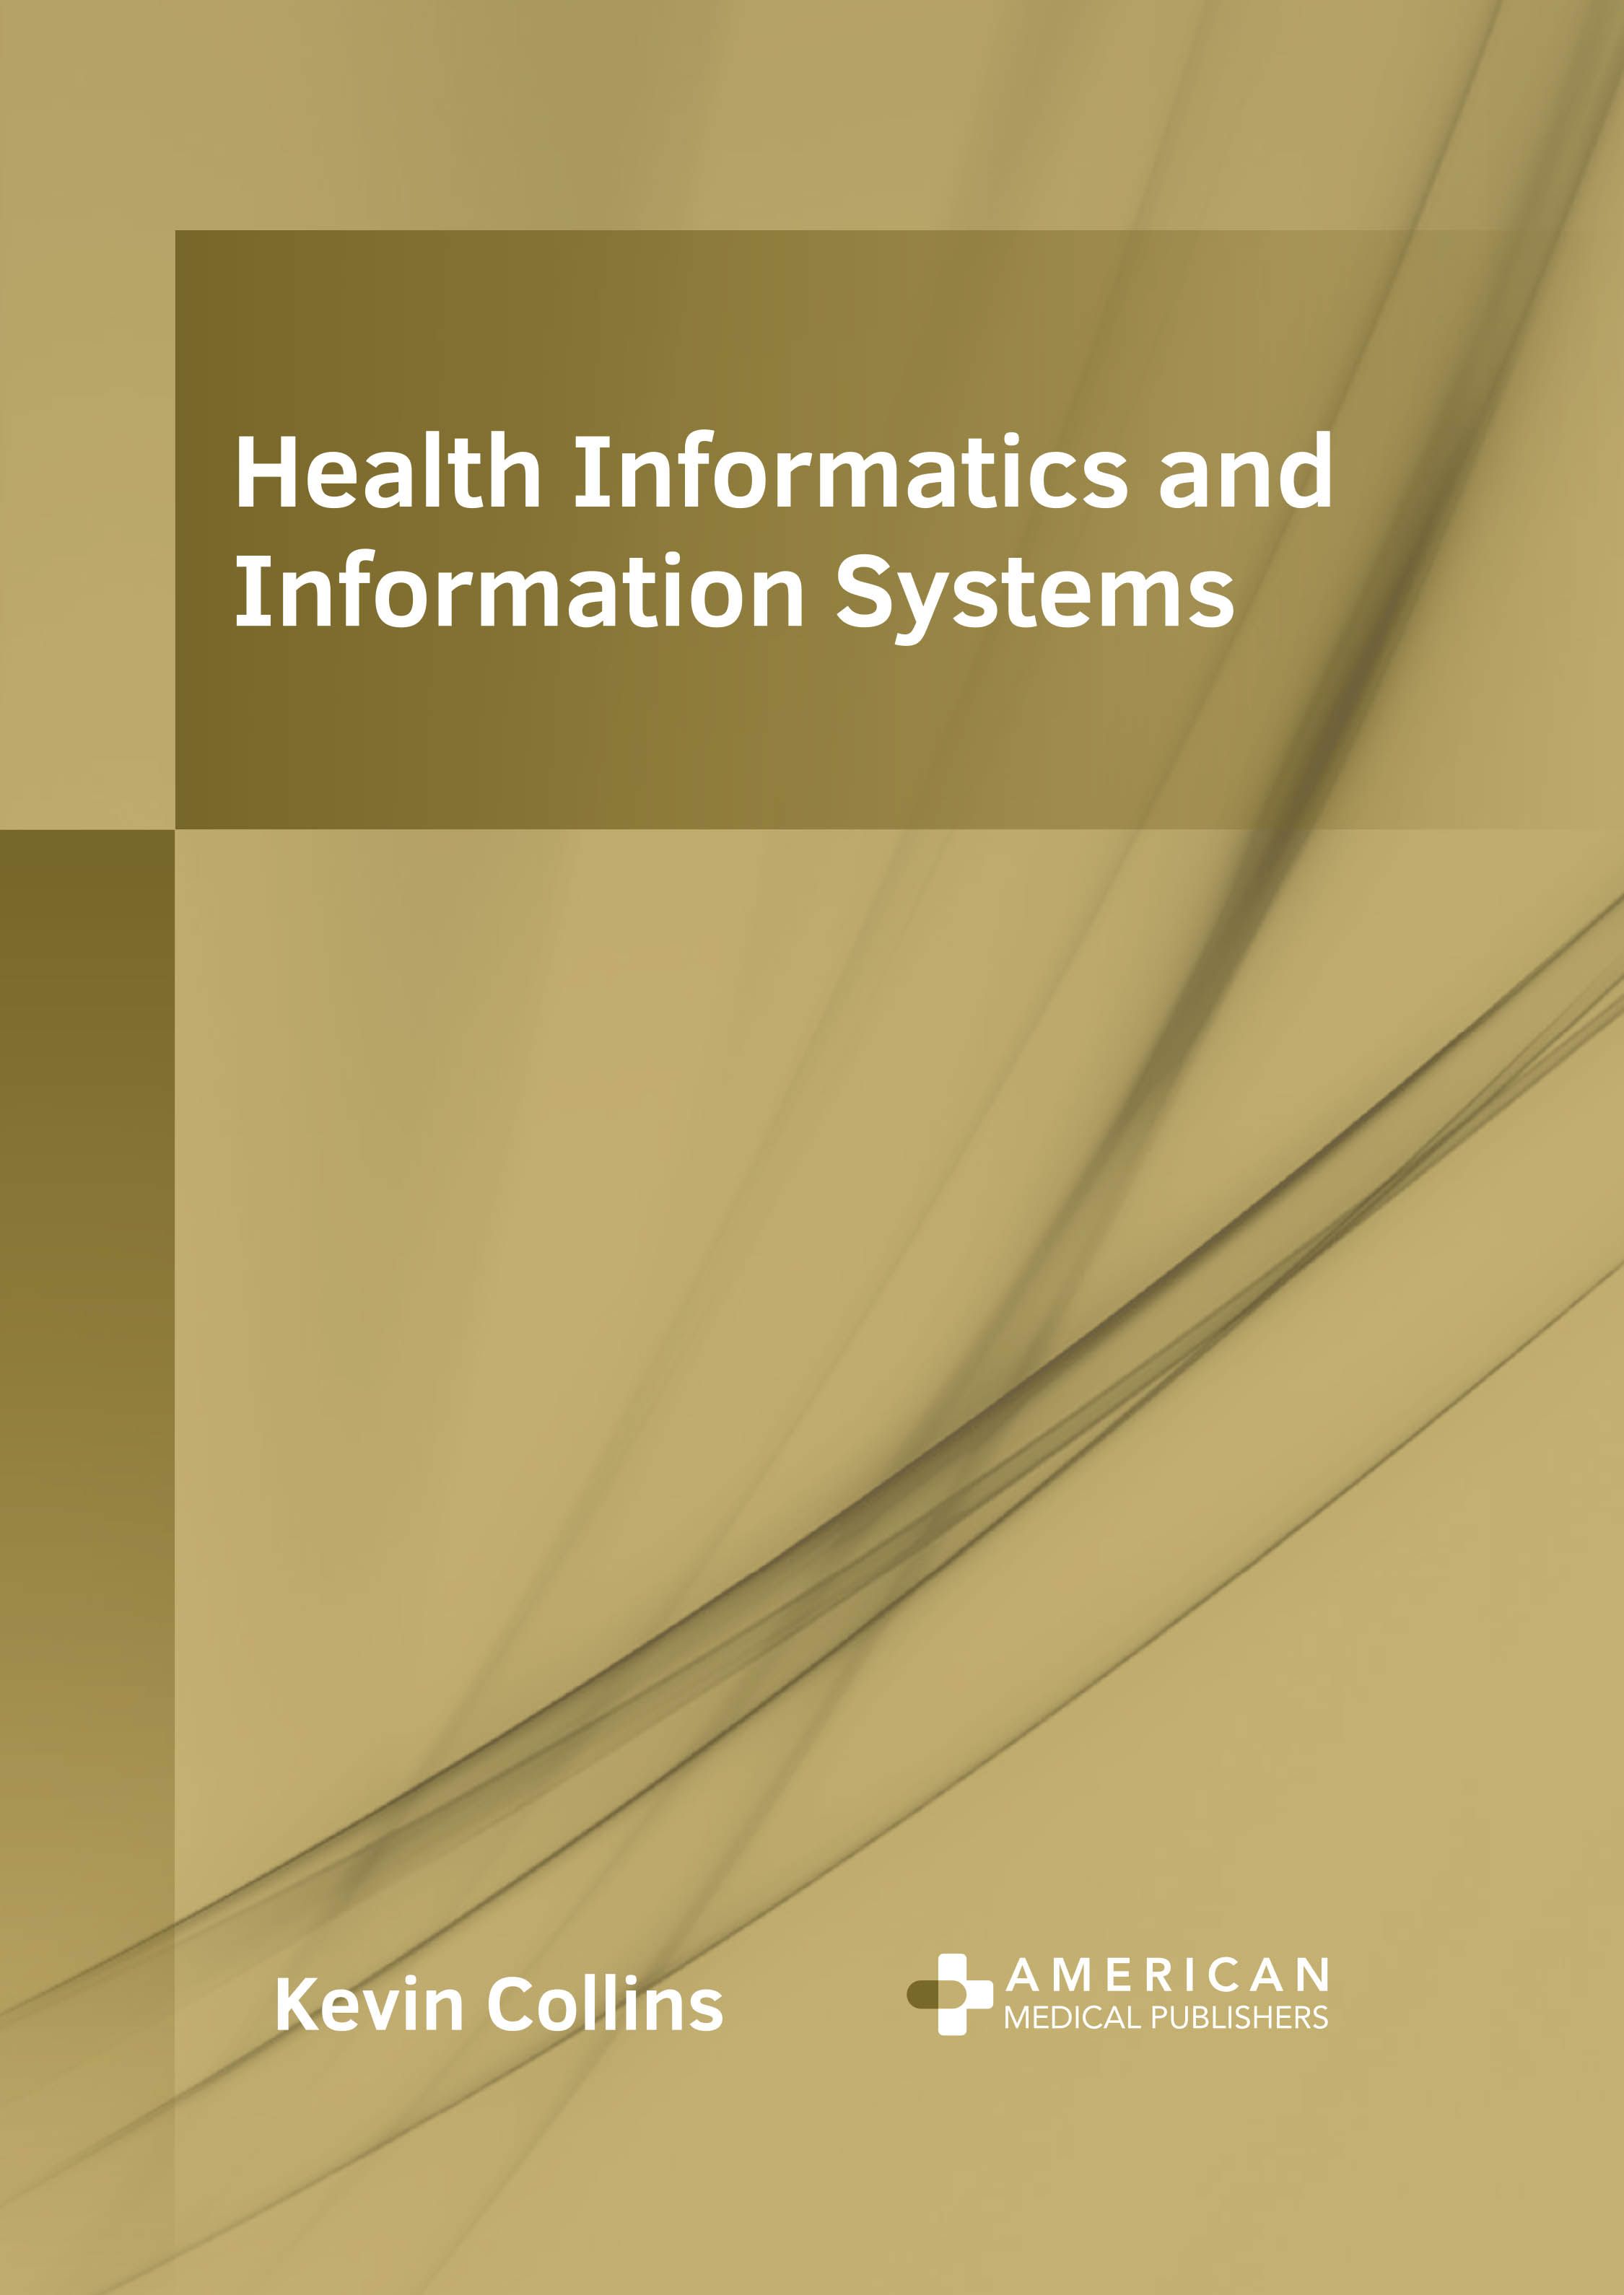 HEALTH INFORMATICS AND INFORMATION SYSTEMS